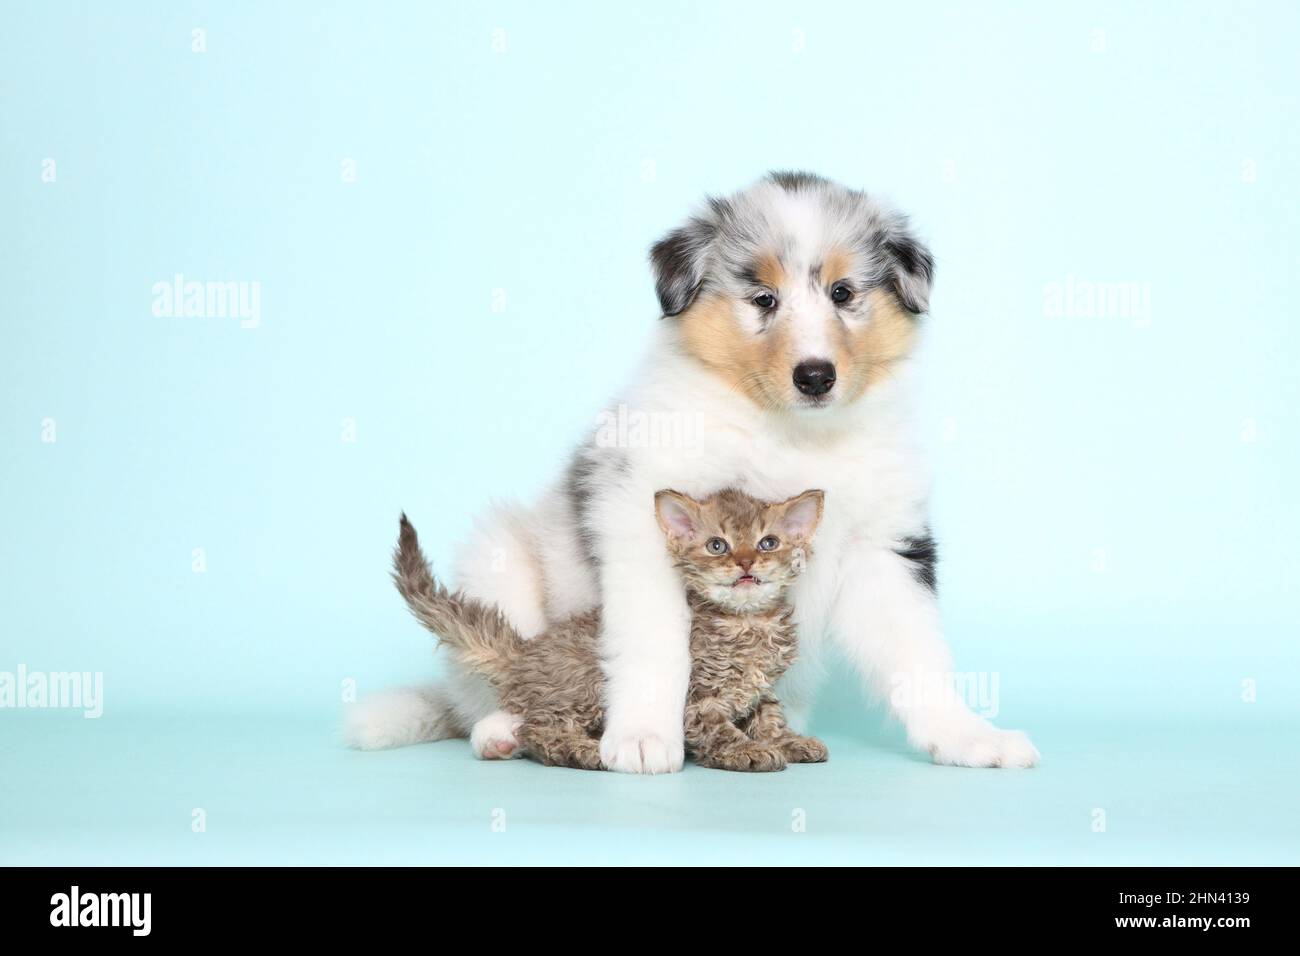 Selkirk Rex. Kitten and a American Collie puppy. Studio picture against a light-blue background. Germany Stock Photo